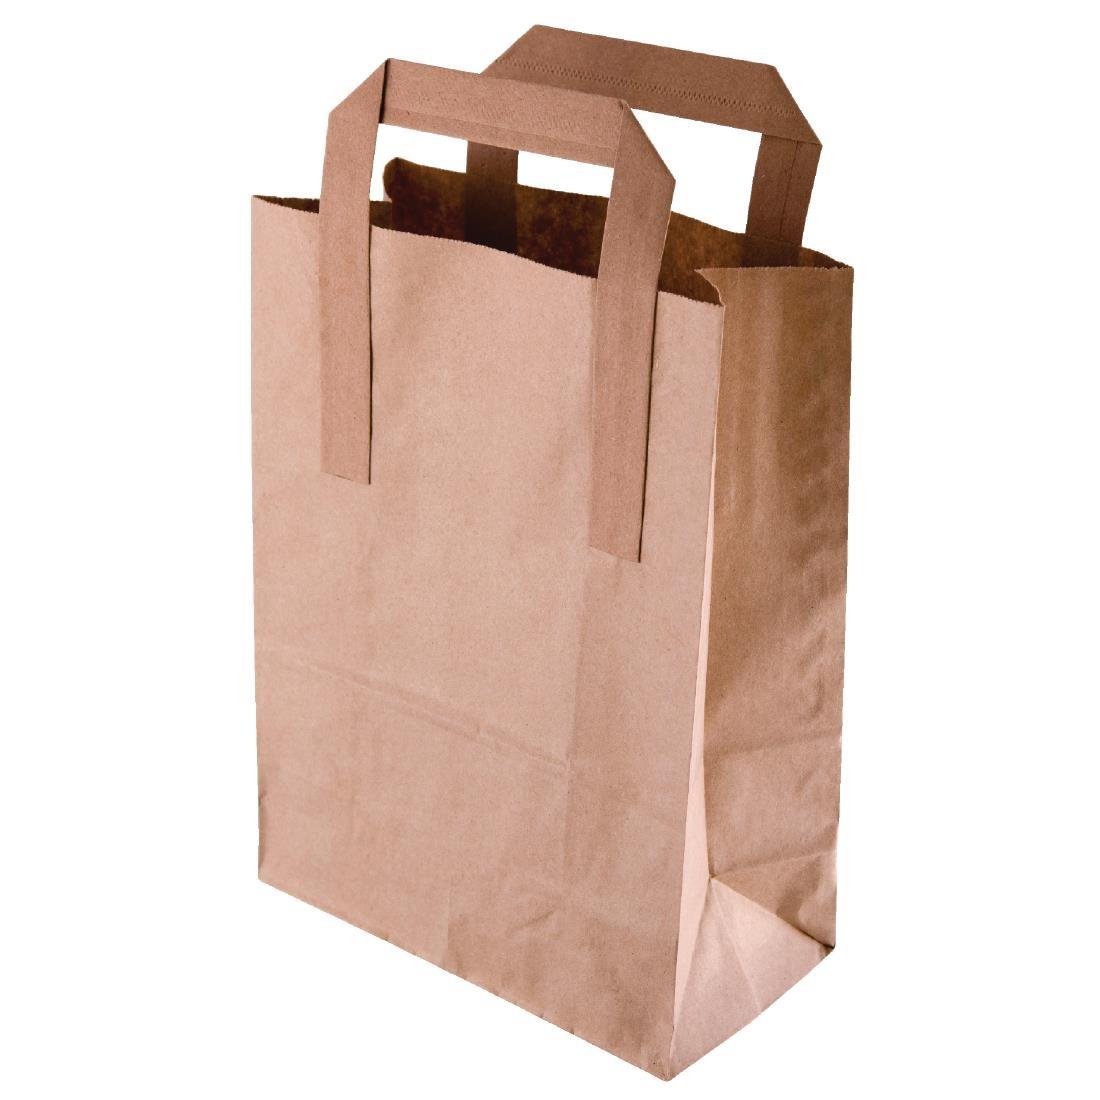 Fiesta Compostable Green Compostable Recycled Brown Paper Carrier Bags Large (Pack of 250) - CF592  - 1